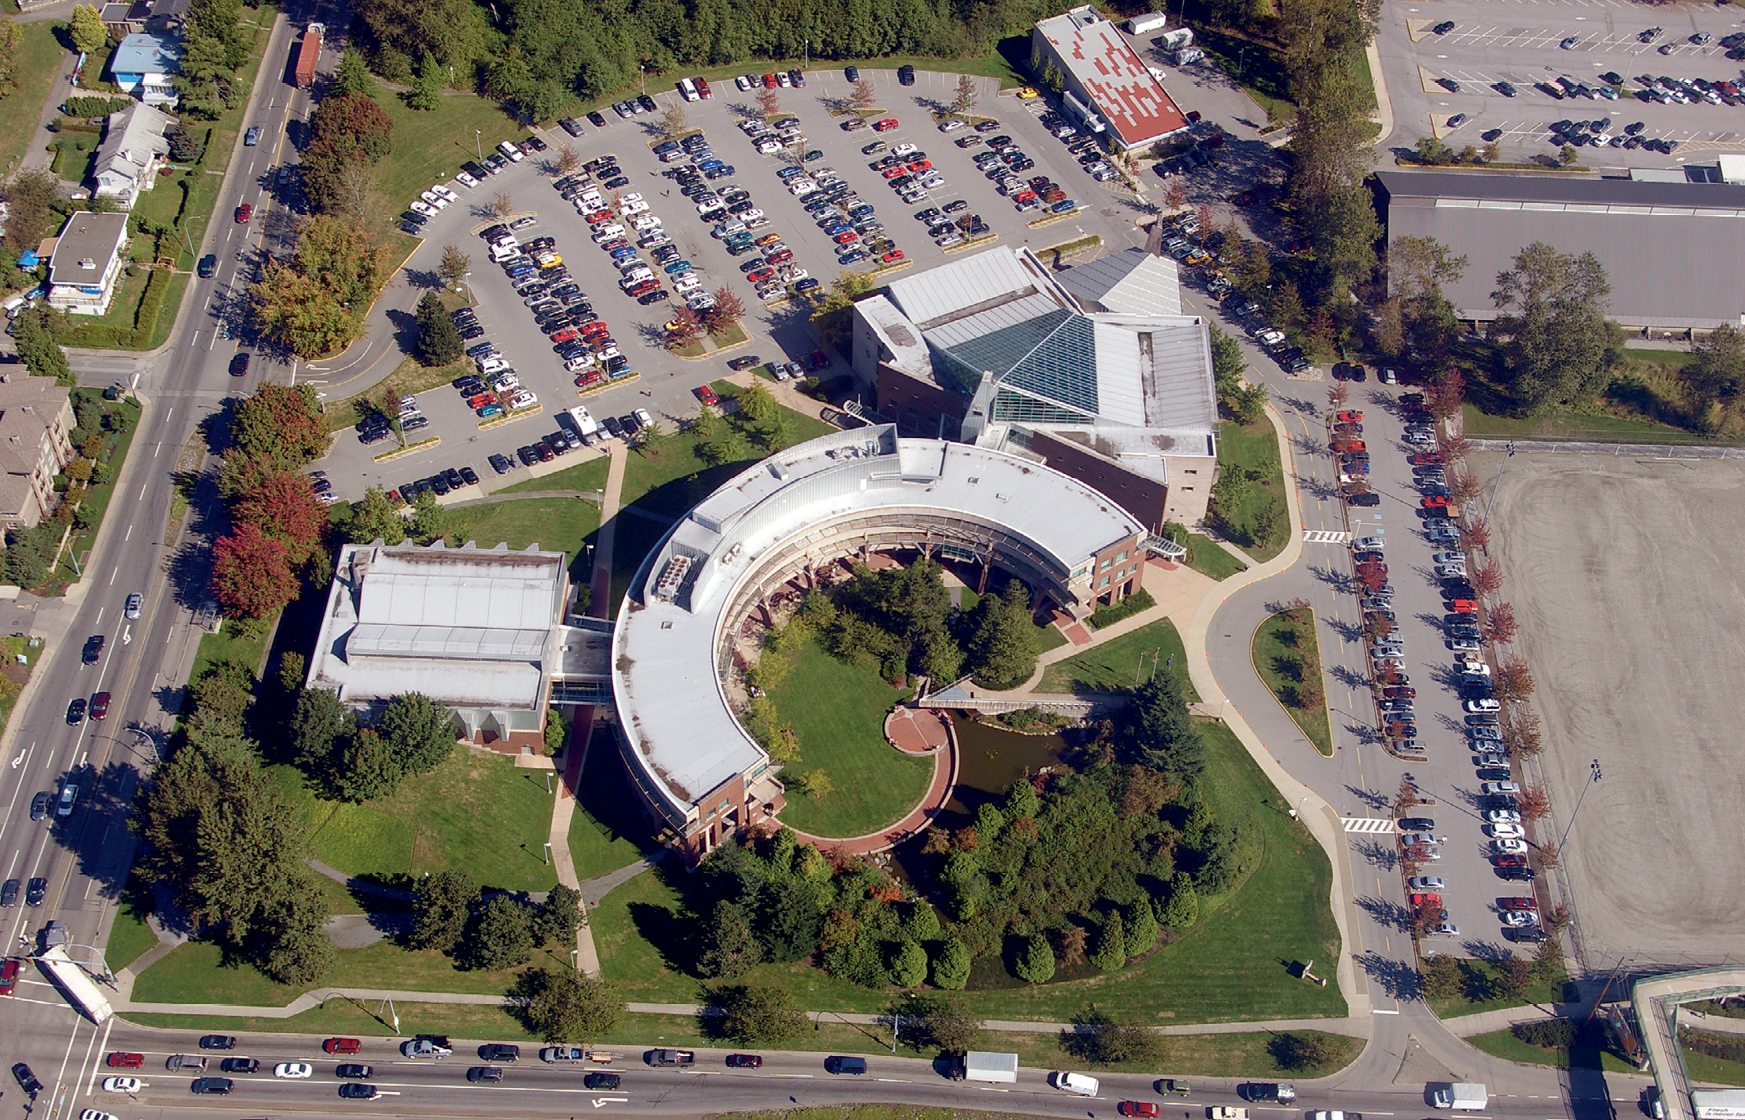 Aerial photograph of The Justice Institute of
British Columbia in Canada. It is a semicircular building surrounded by trees and carparks.
